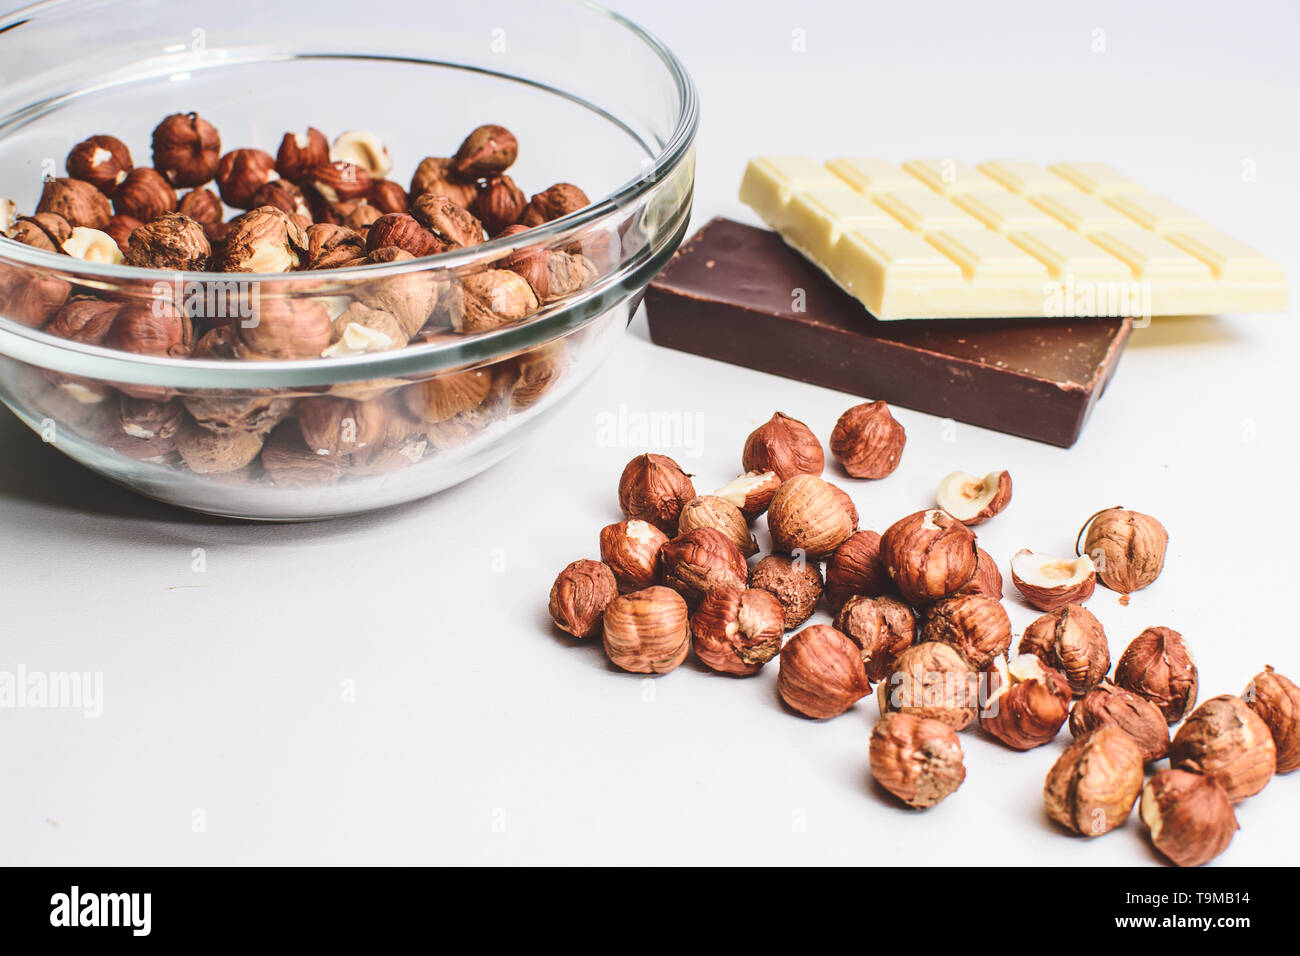 Isolated crystal bowl with hazelnuts, white chocolate and milk or dark chocolate against white background. Peeled nuts Stock Photo